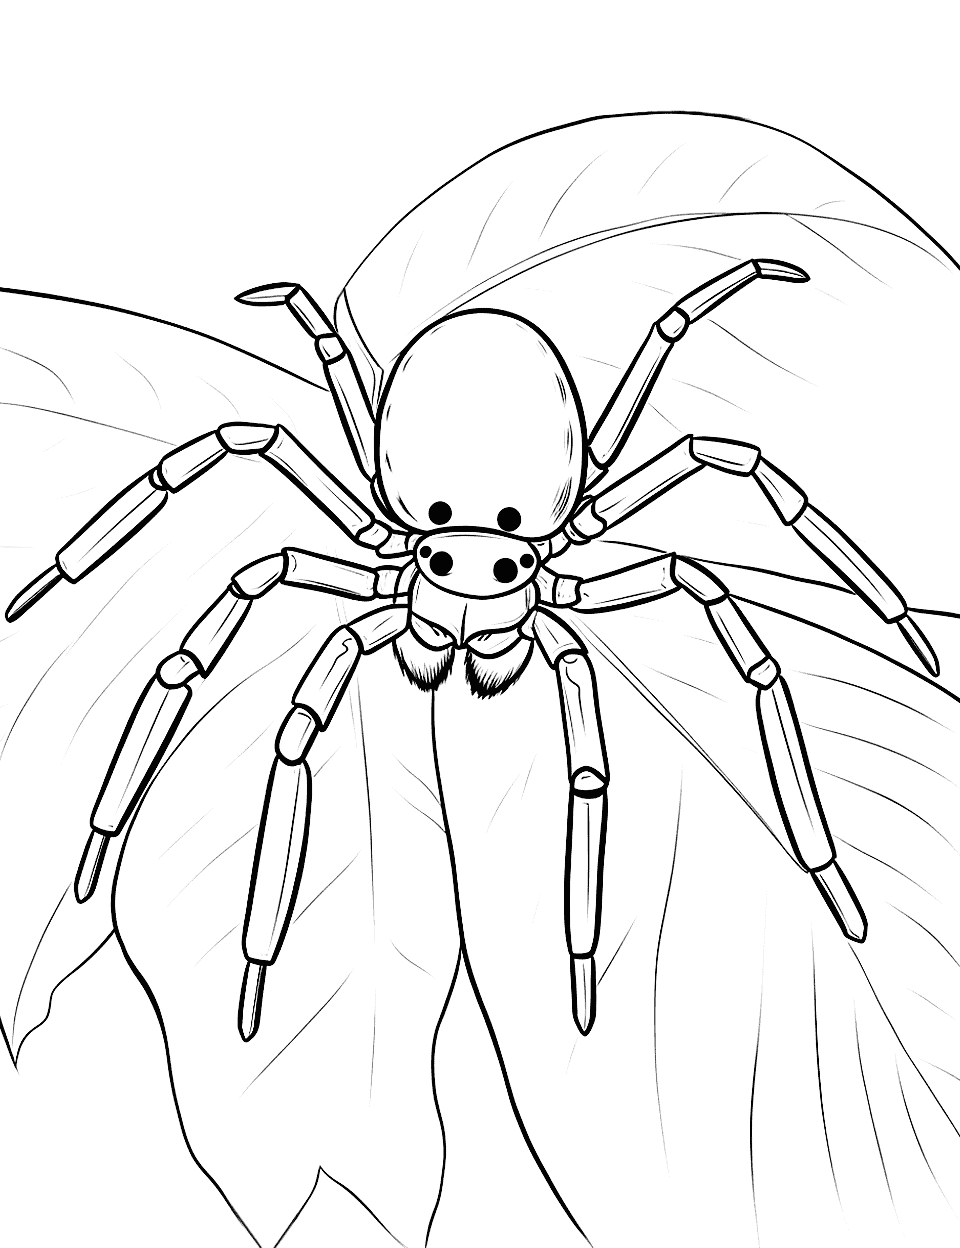 Small Spider on a Leaf Coloring Page - A tiny spider crawling on a large leaf.